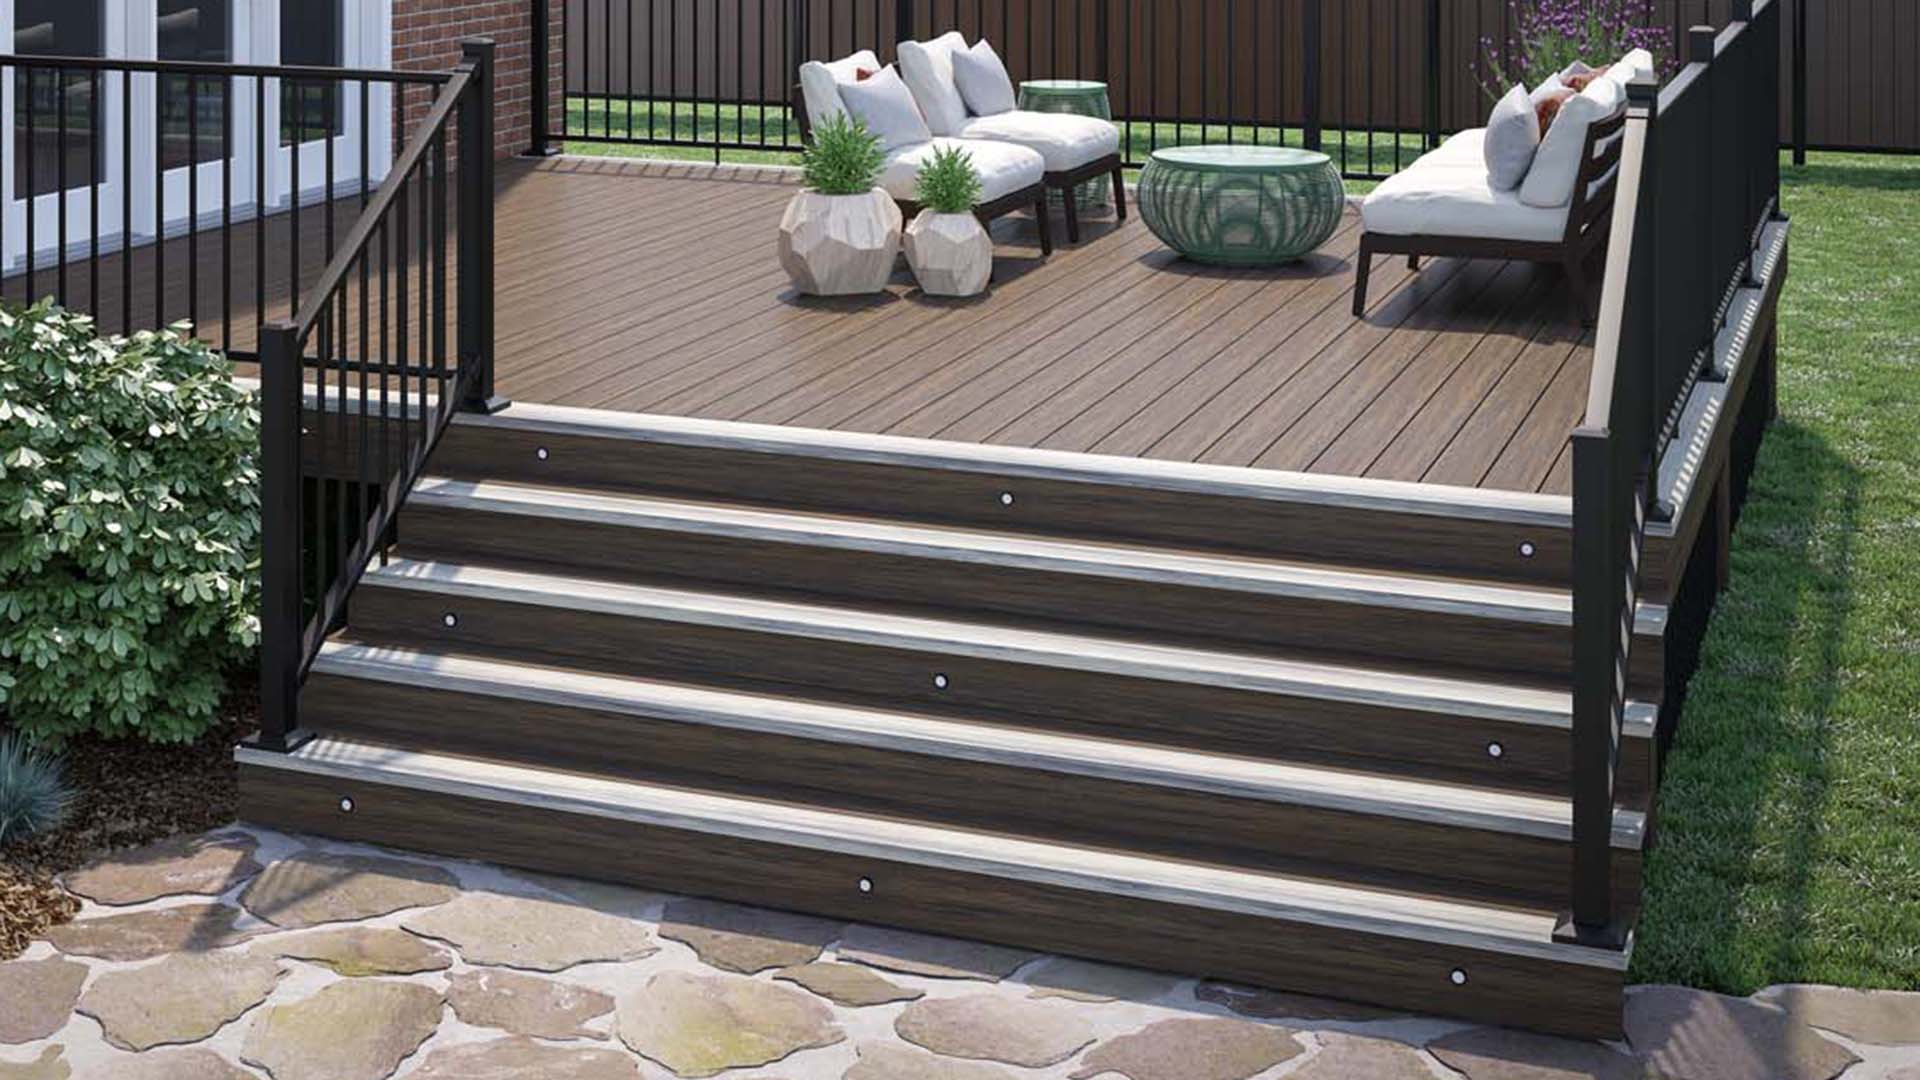 Composite Deck with Deckorators Deck Lighting Recessed within the Stairs